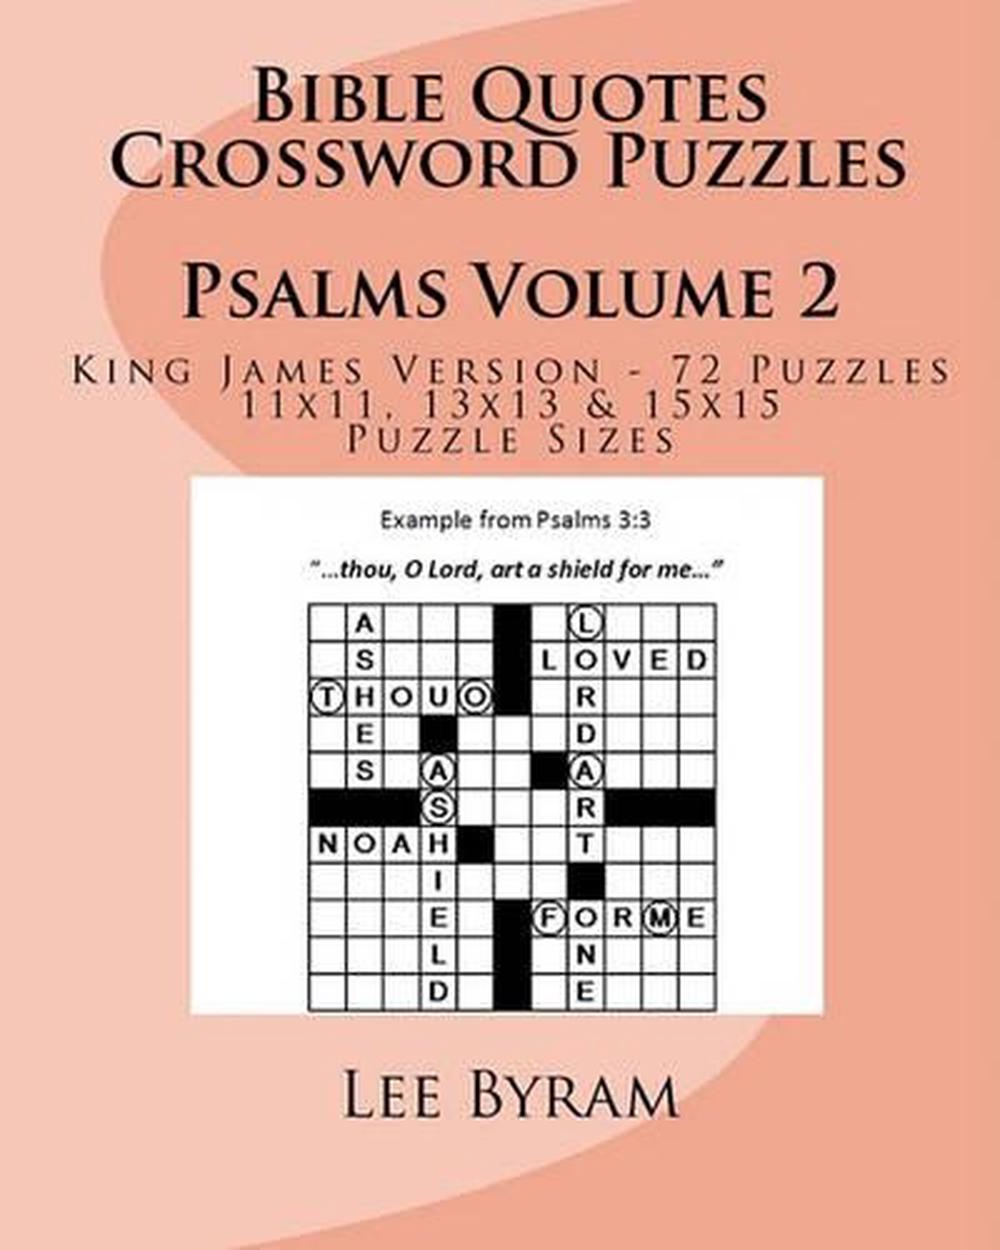 Bible Quotes Crossword Puzzles: Psalms by Lee Byram (English) Paperback